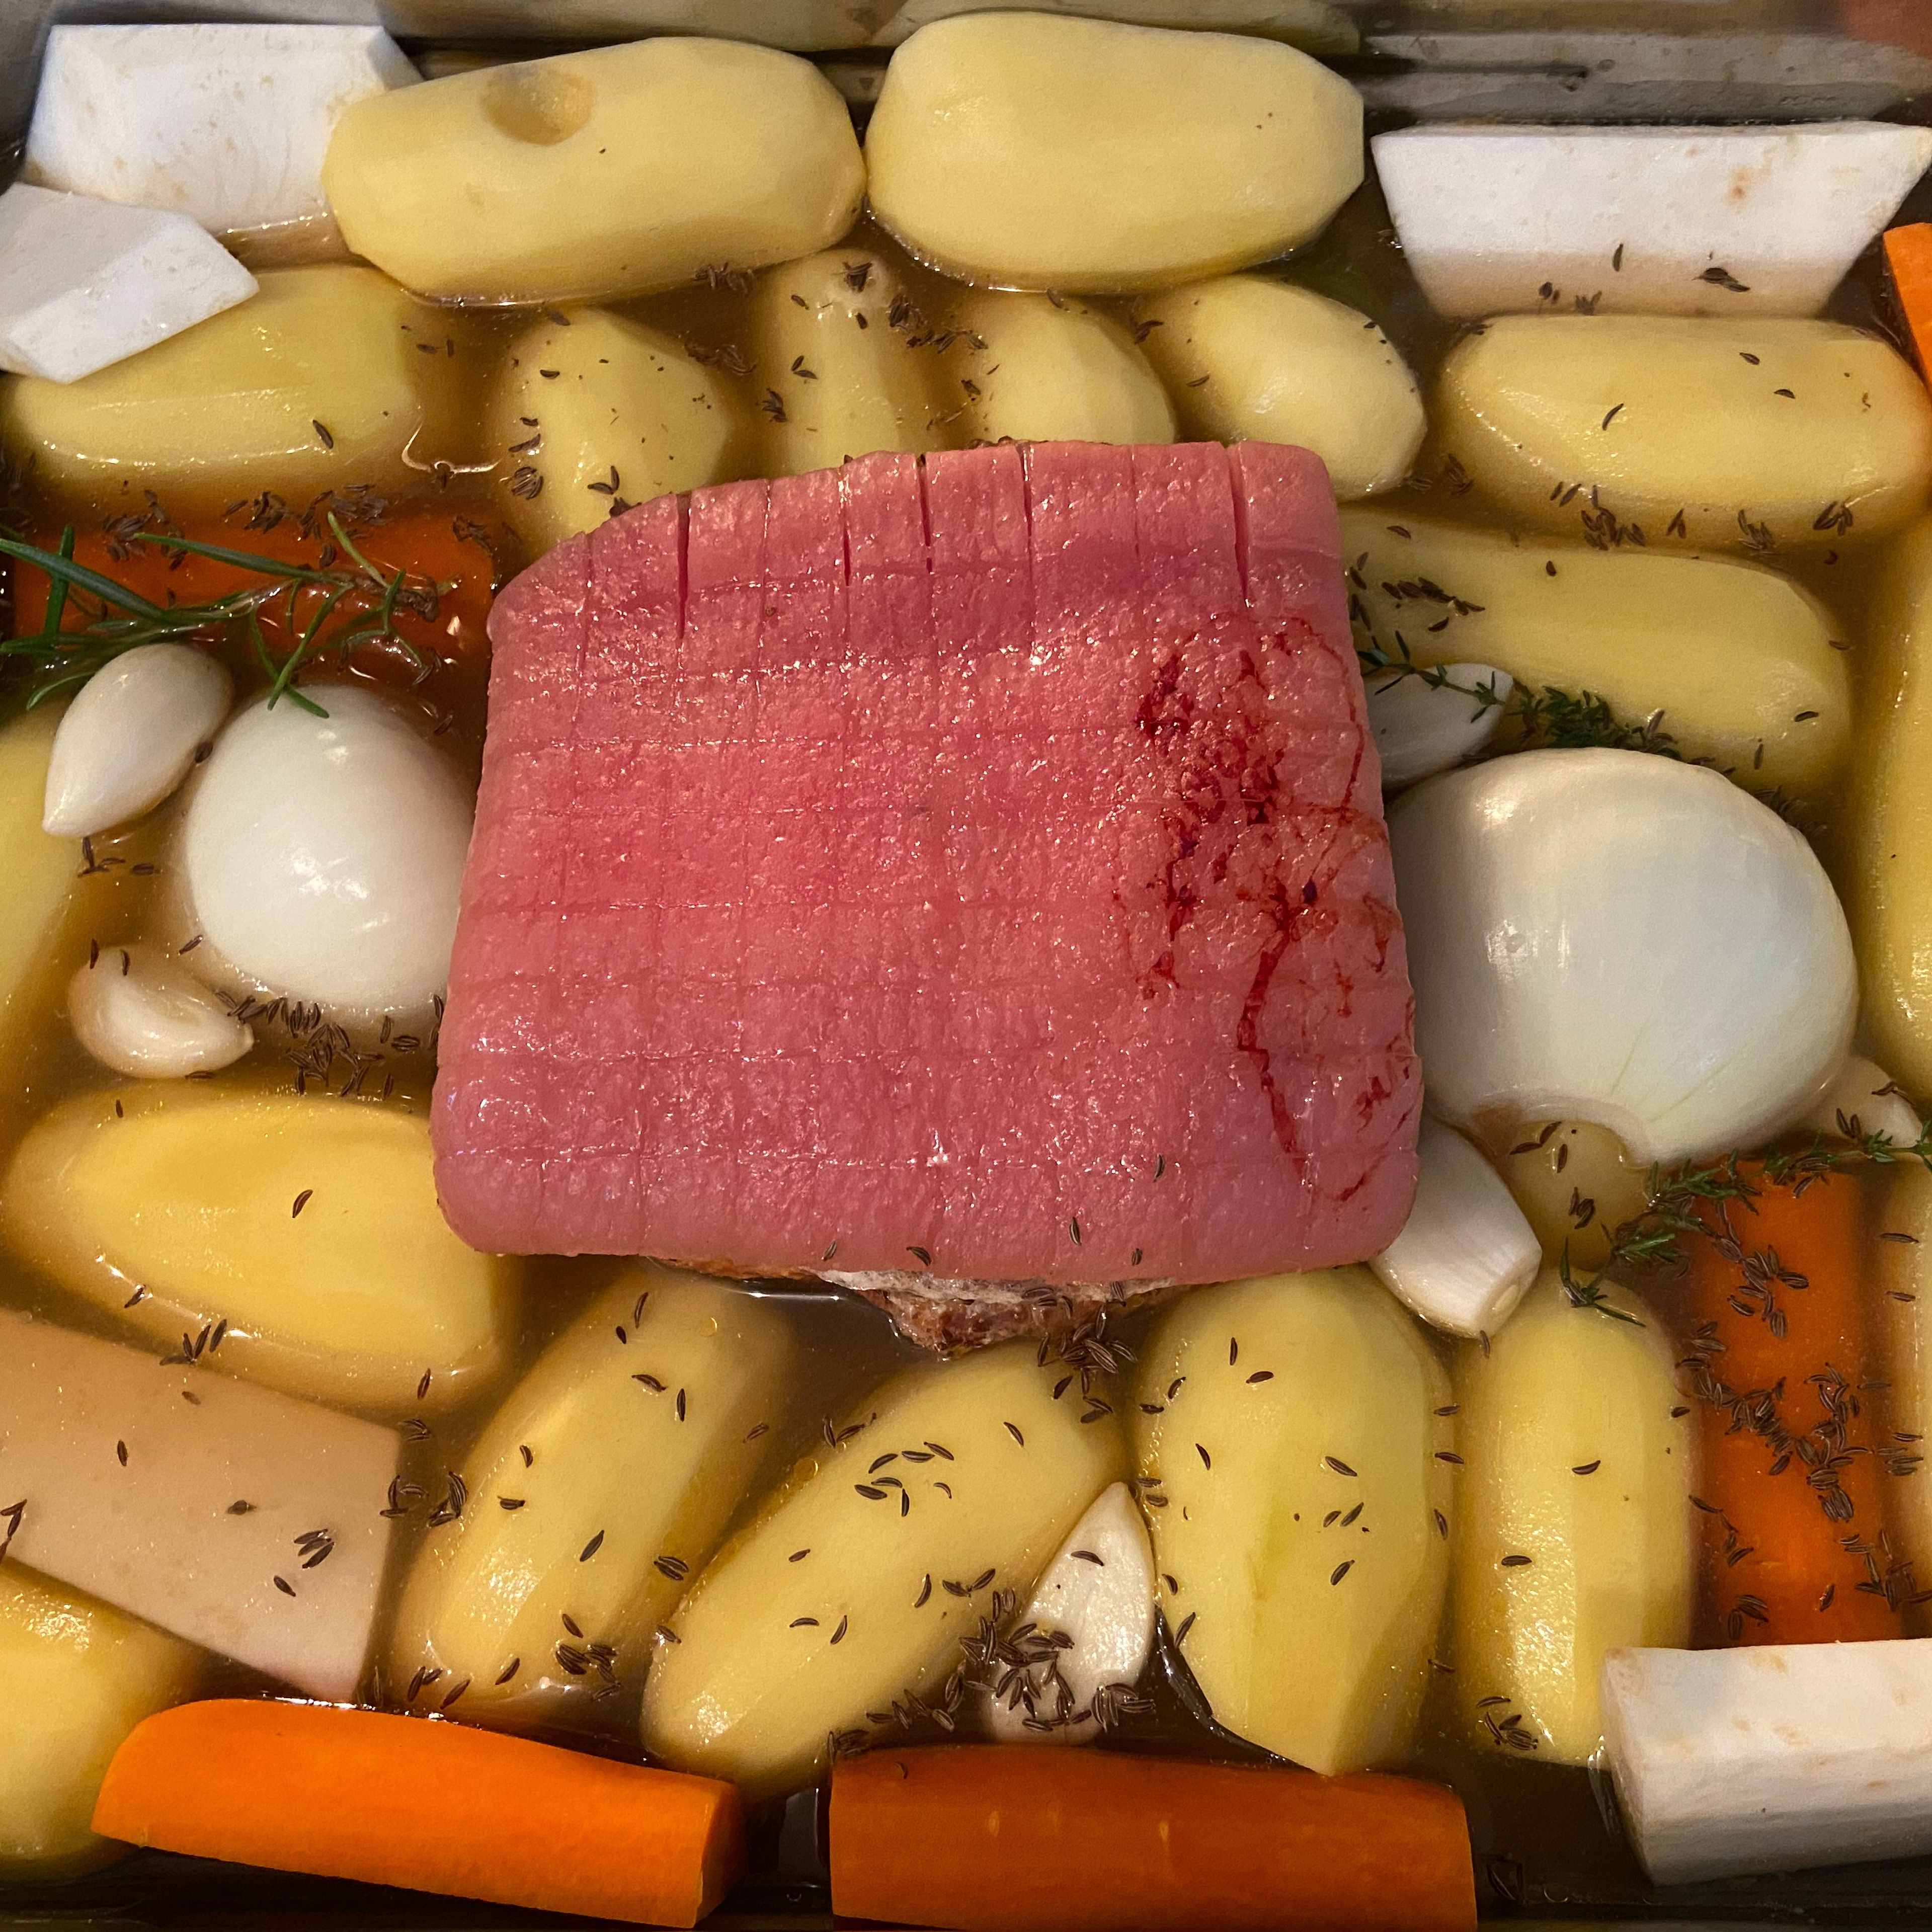 After approx. 30 min. turn the pork belly over and score the rind. Add the vegetables to the roasting pan, add water or stock. (the vegetables should not be completely covered) Add 1/2 tbsp caraway seeds, 2 bay leaves, 1 sprig of rosemary and thyme and transfer back to the oven for approx. 1 1/2–2 hrs. at 150°C/300°F.